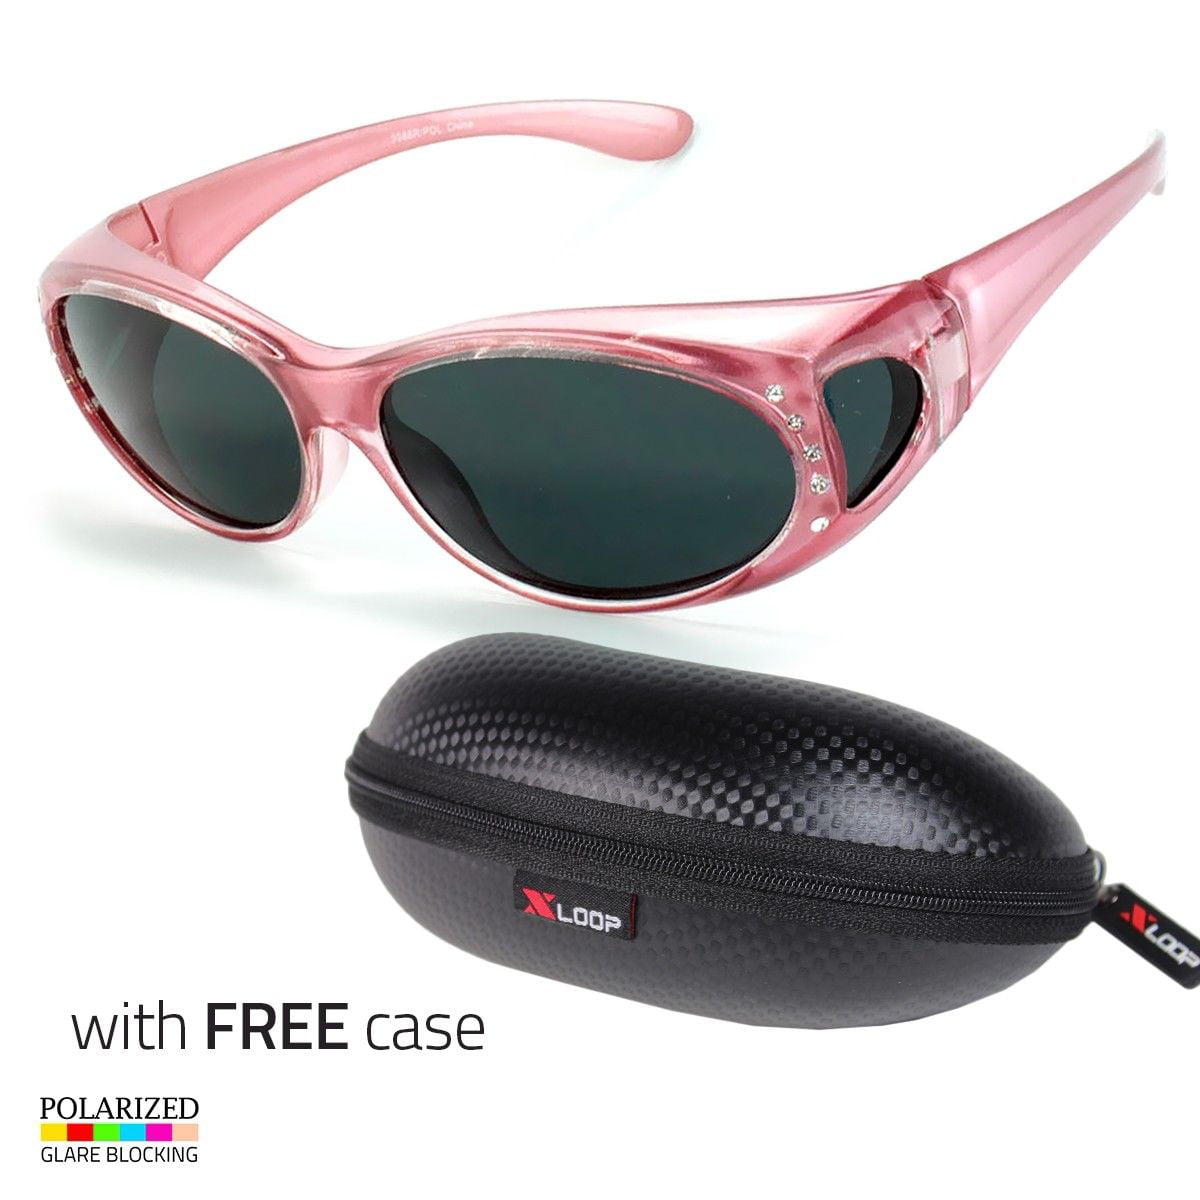 3 PAIR POLARIZED Rhinestone cover put over Sunglasses wear Rx glass driving Pink 